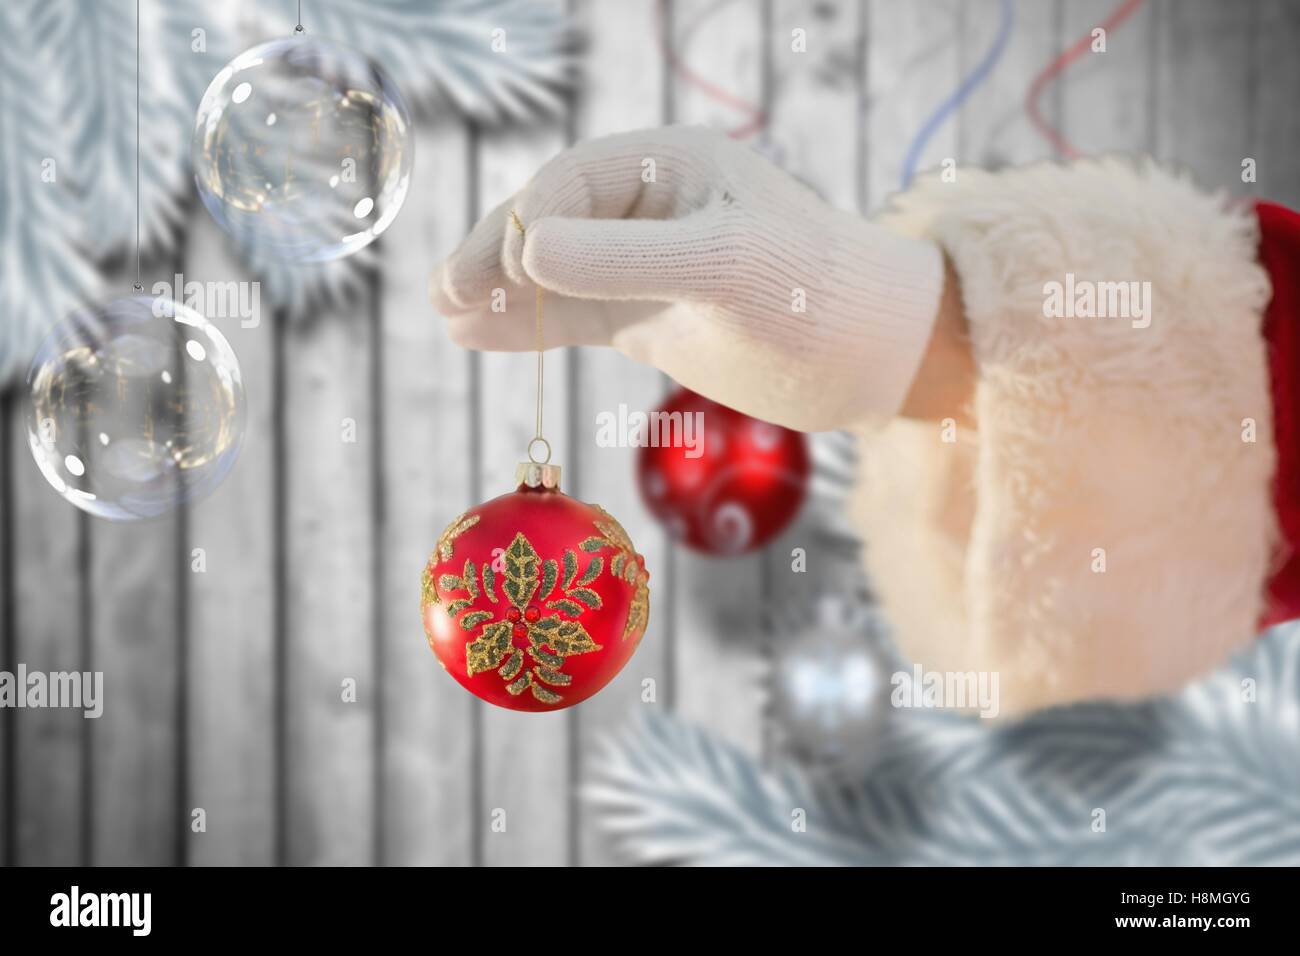 Santa claus holding a christmas bauble Stock Photo